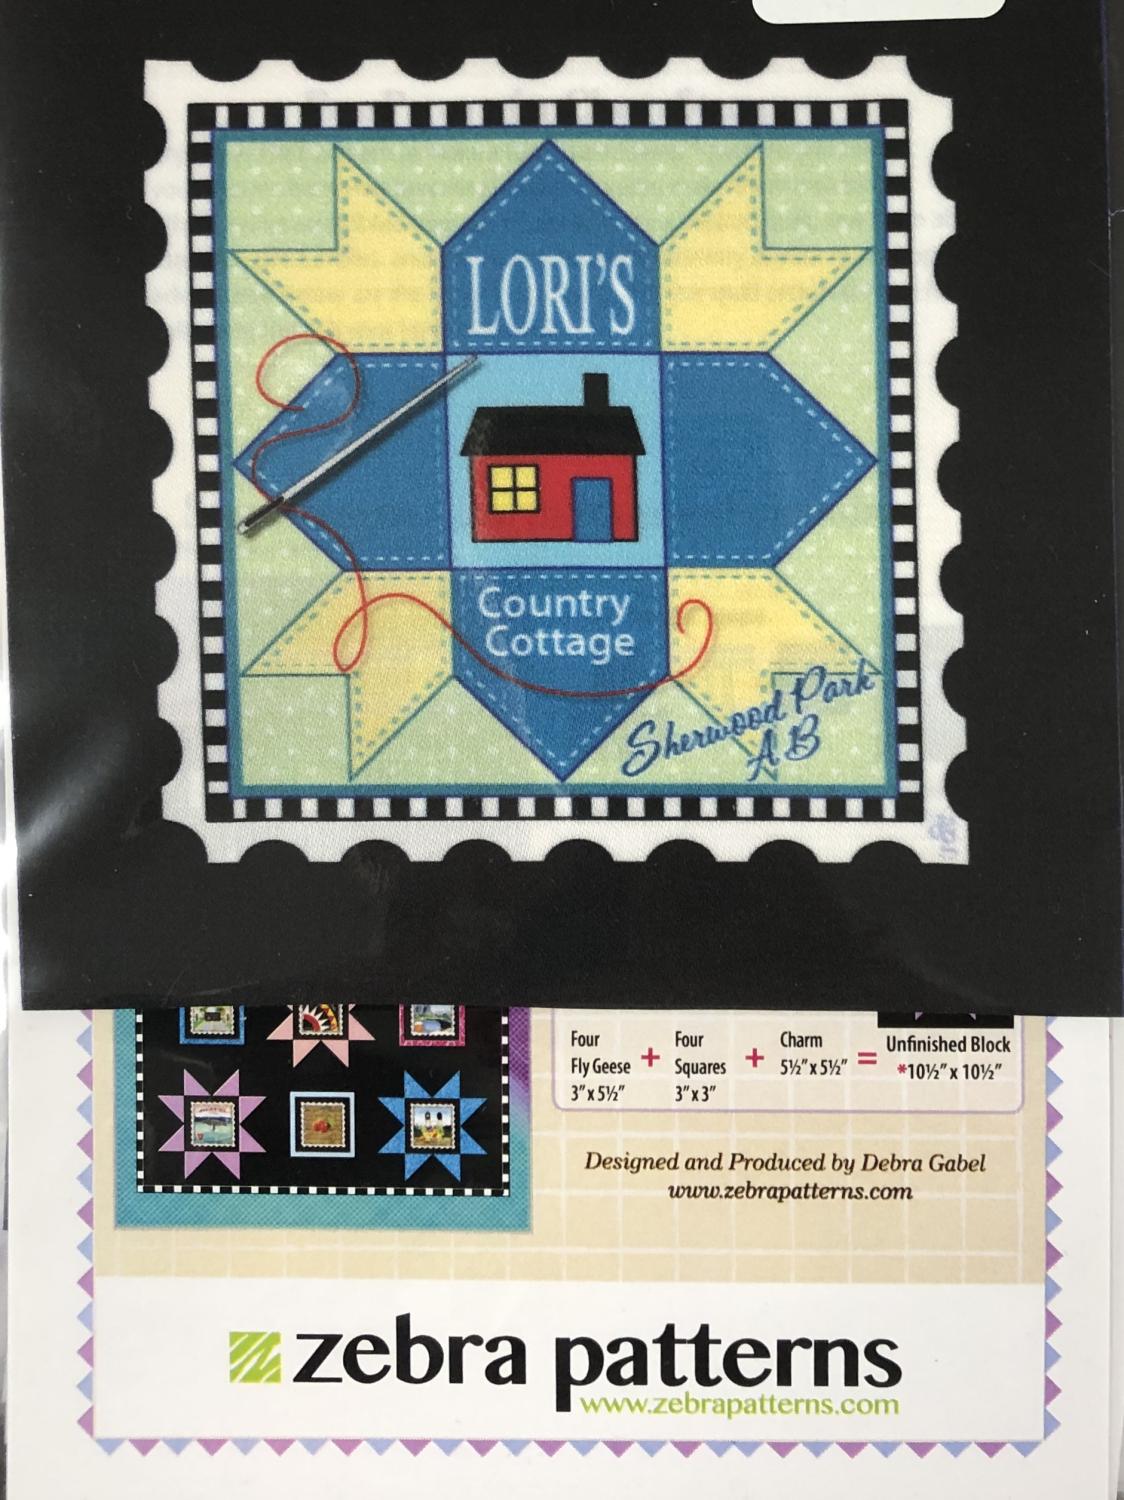 Exclusive LCC Charm Stamp